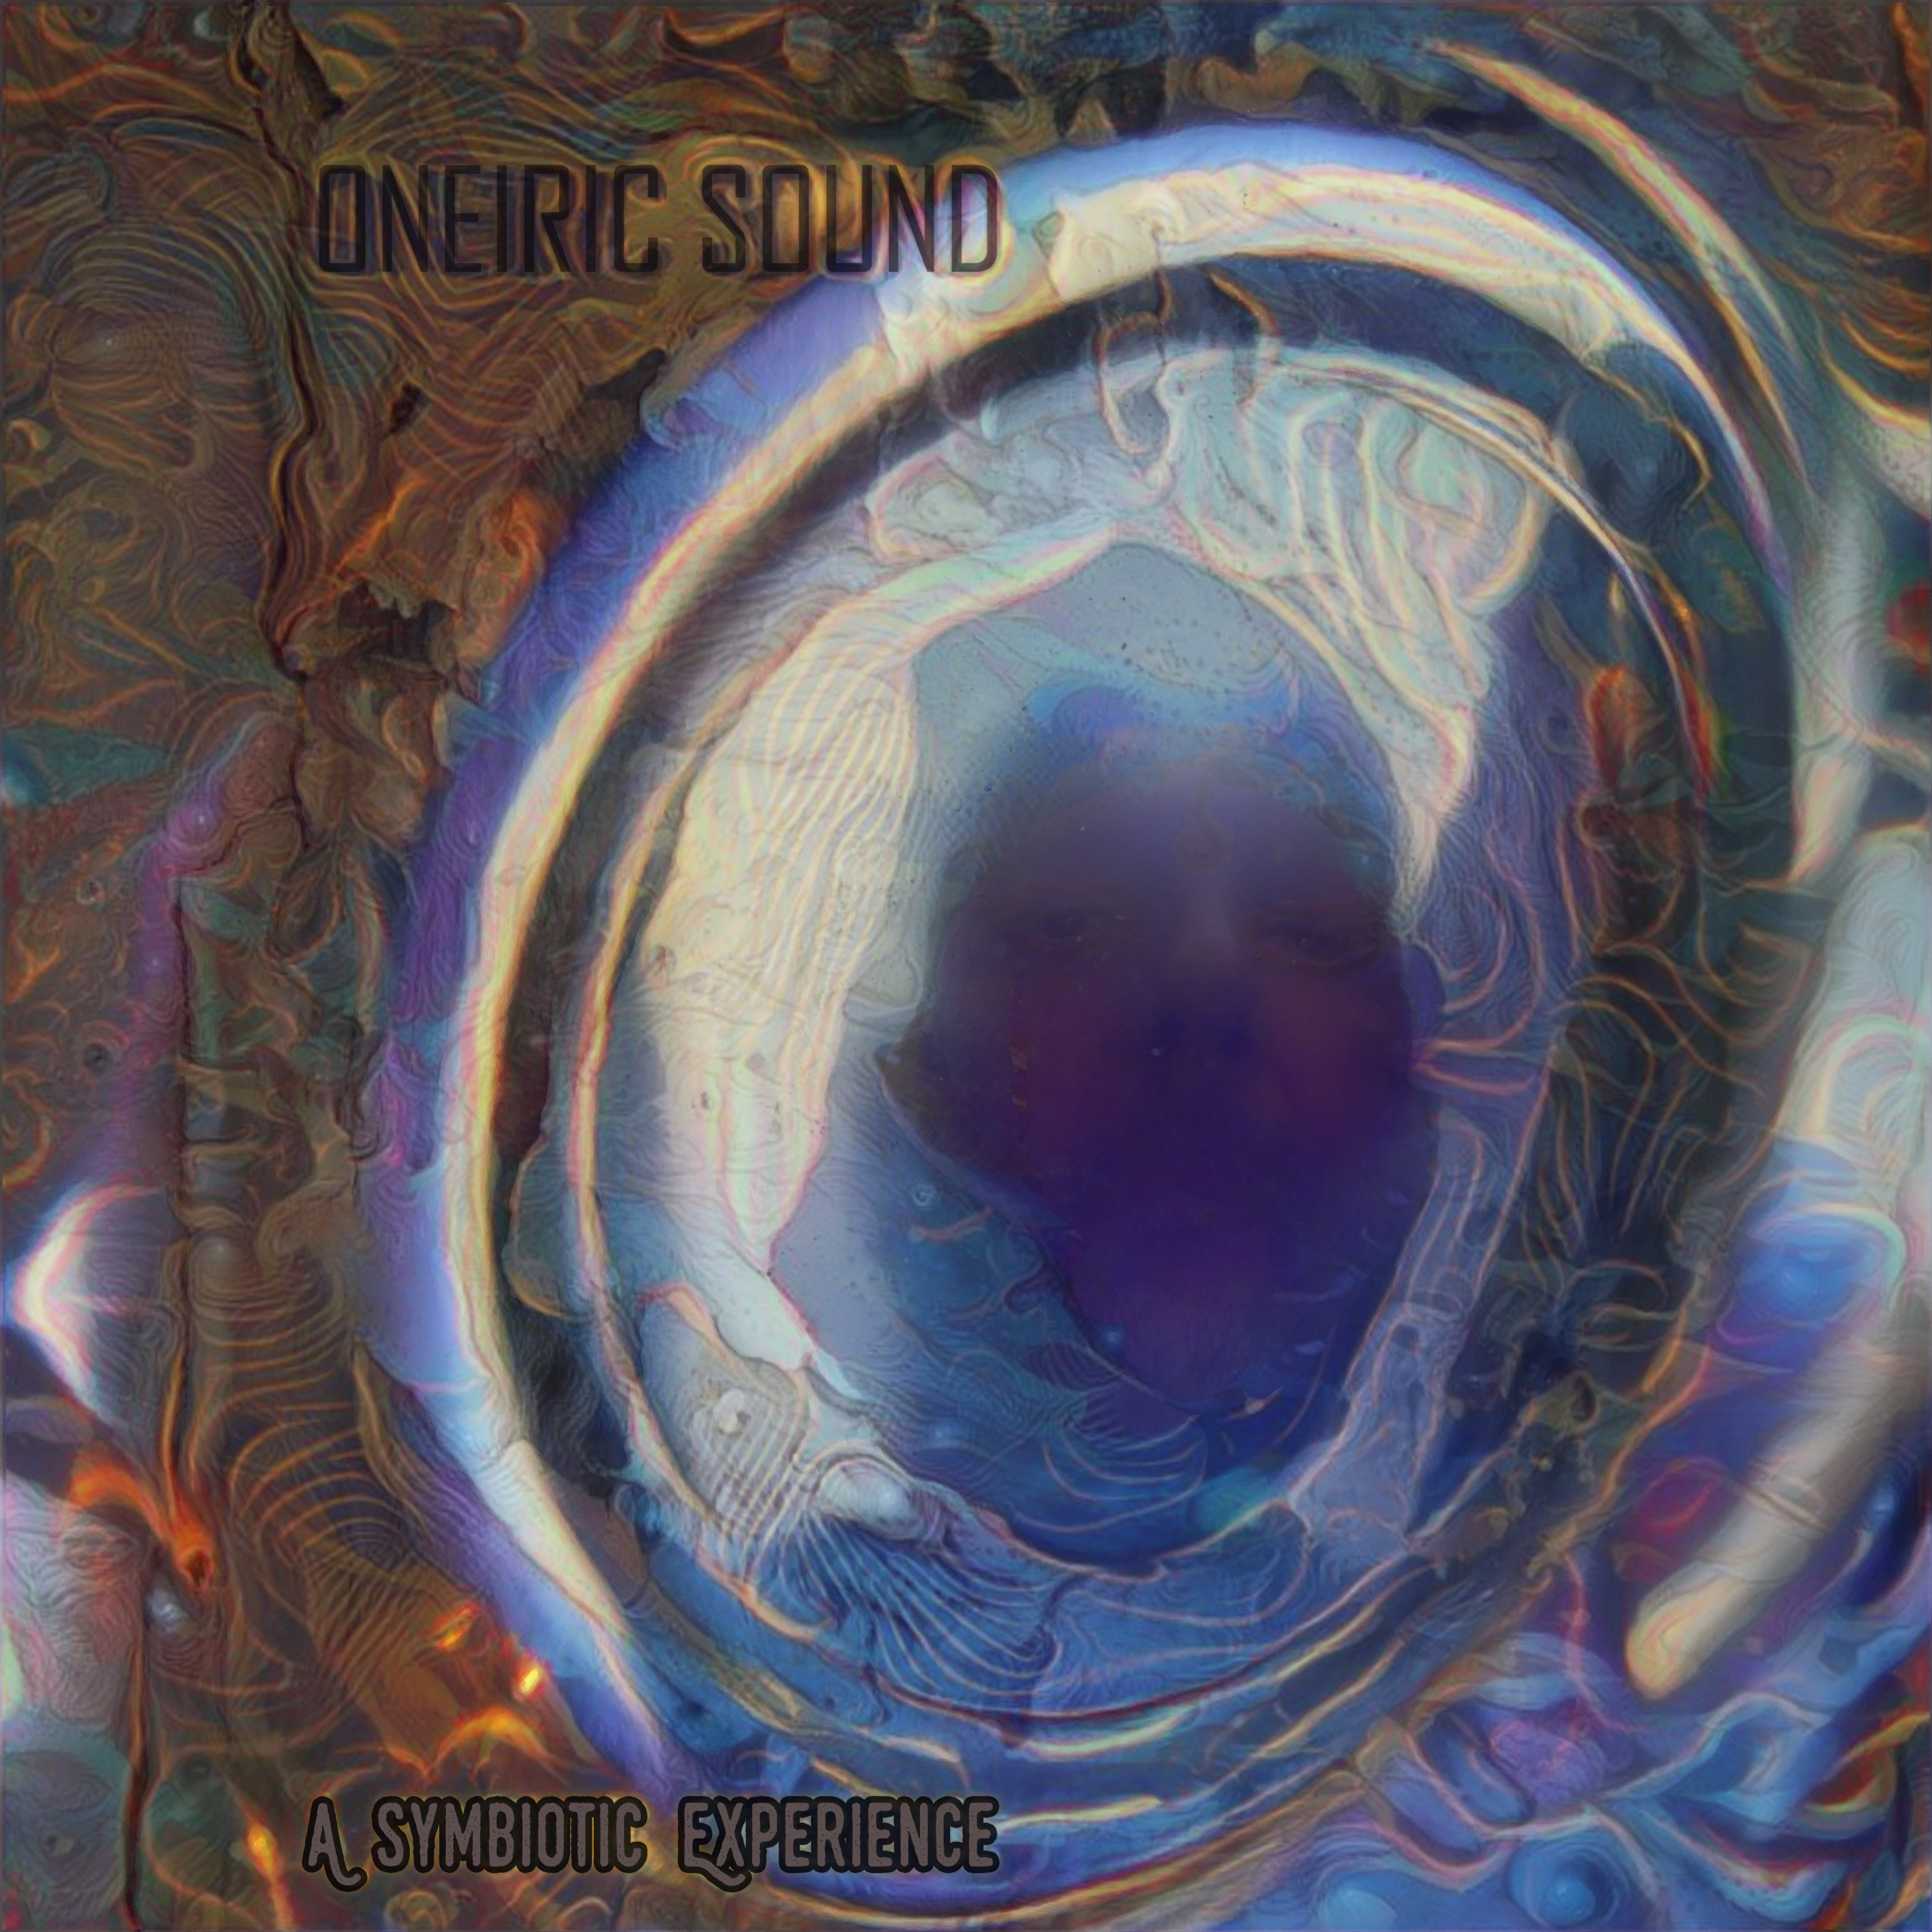 A Symbiotic Experience – Oneiric Sound